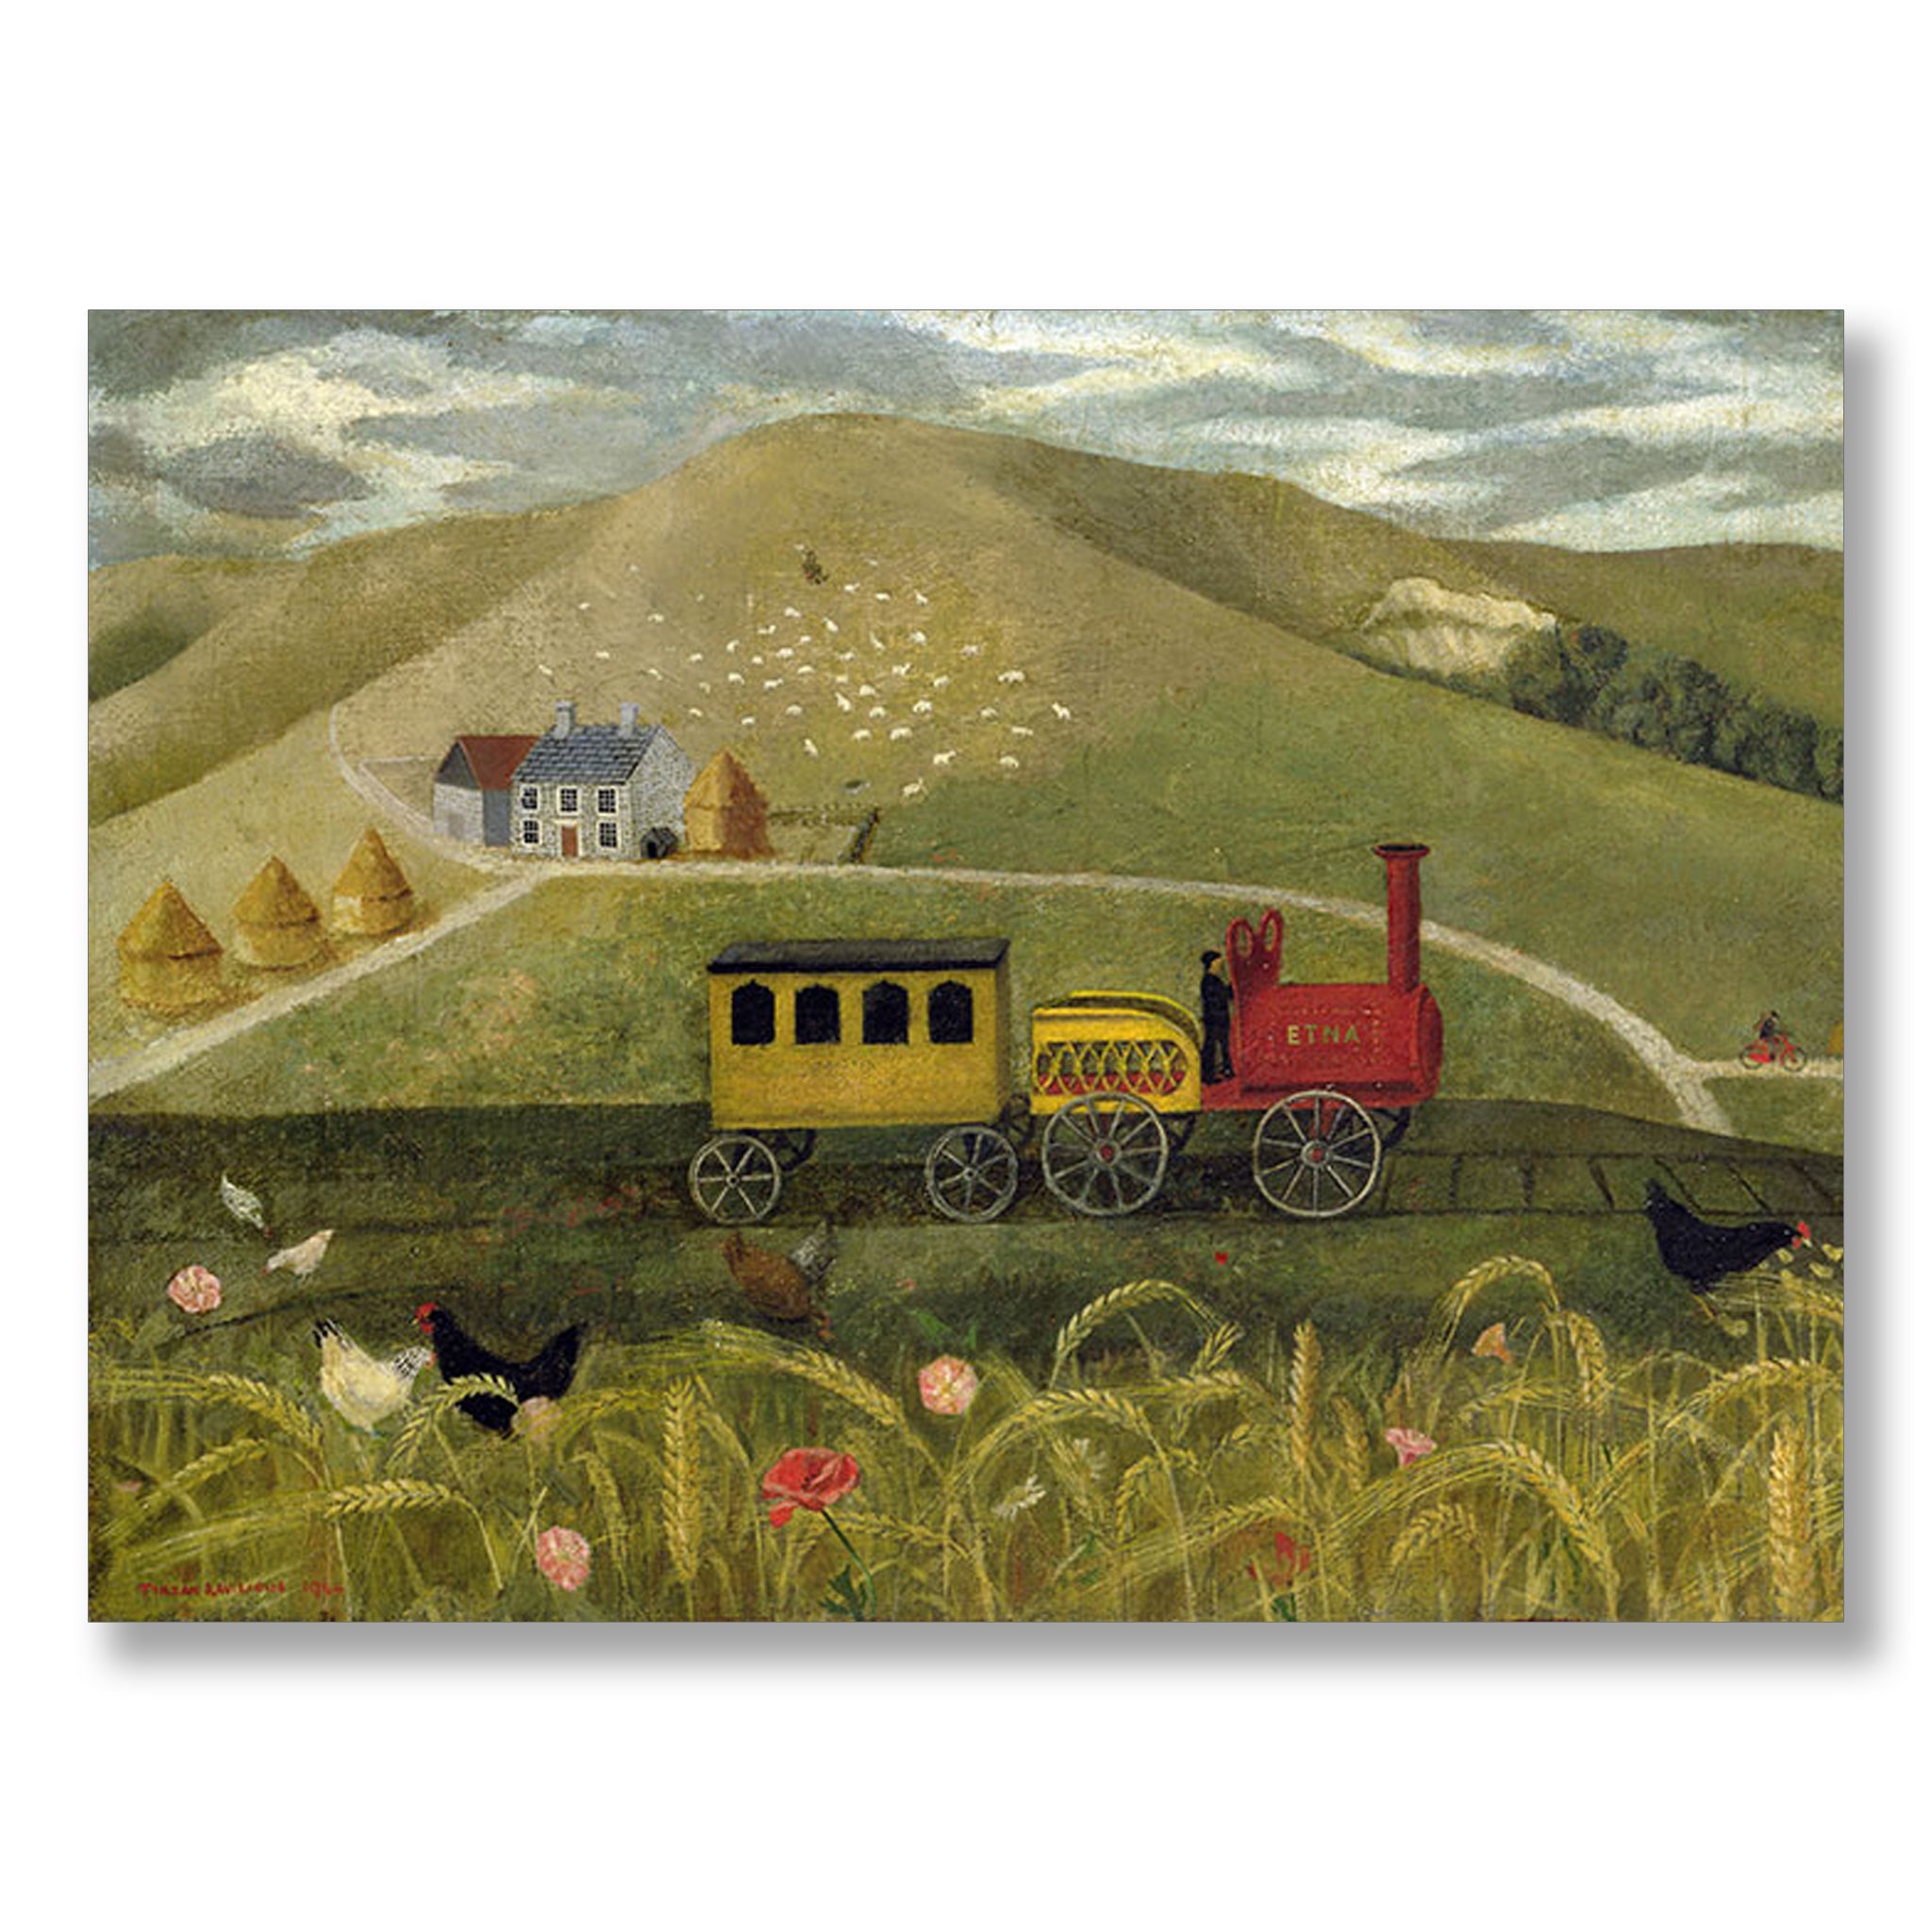 Etna by Tirzah Ravilious